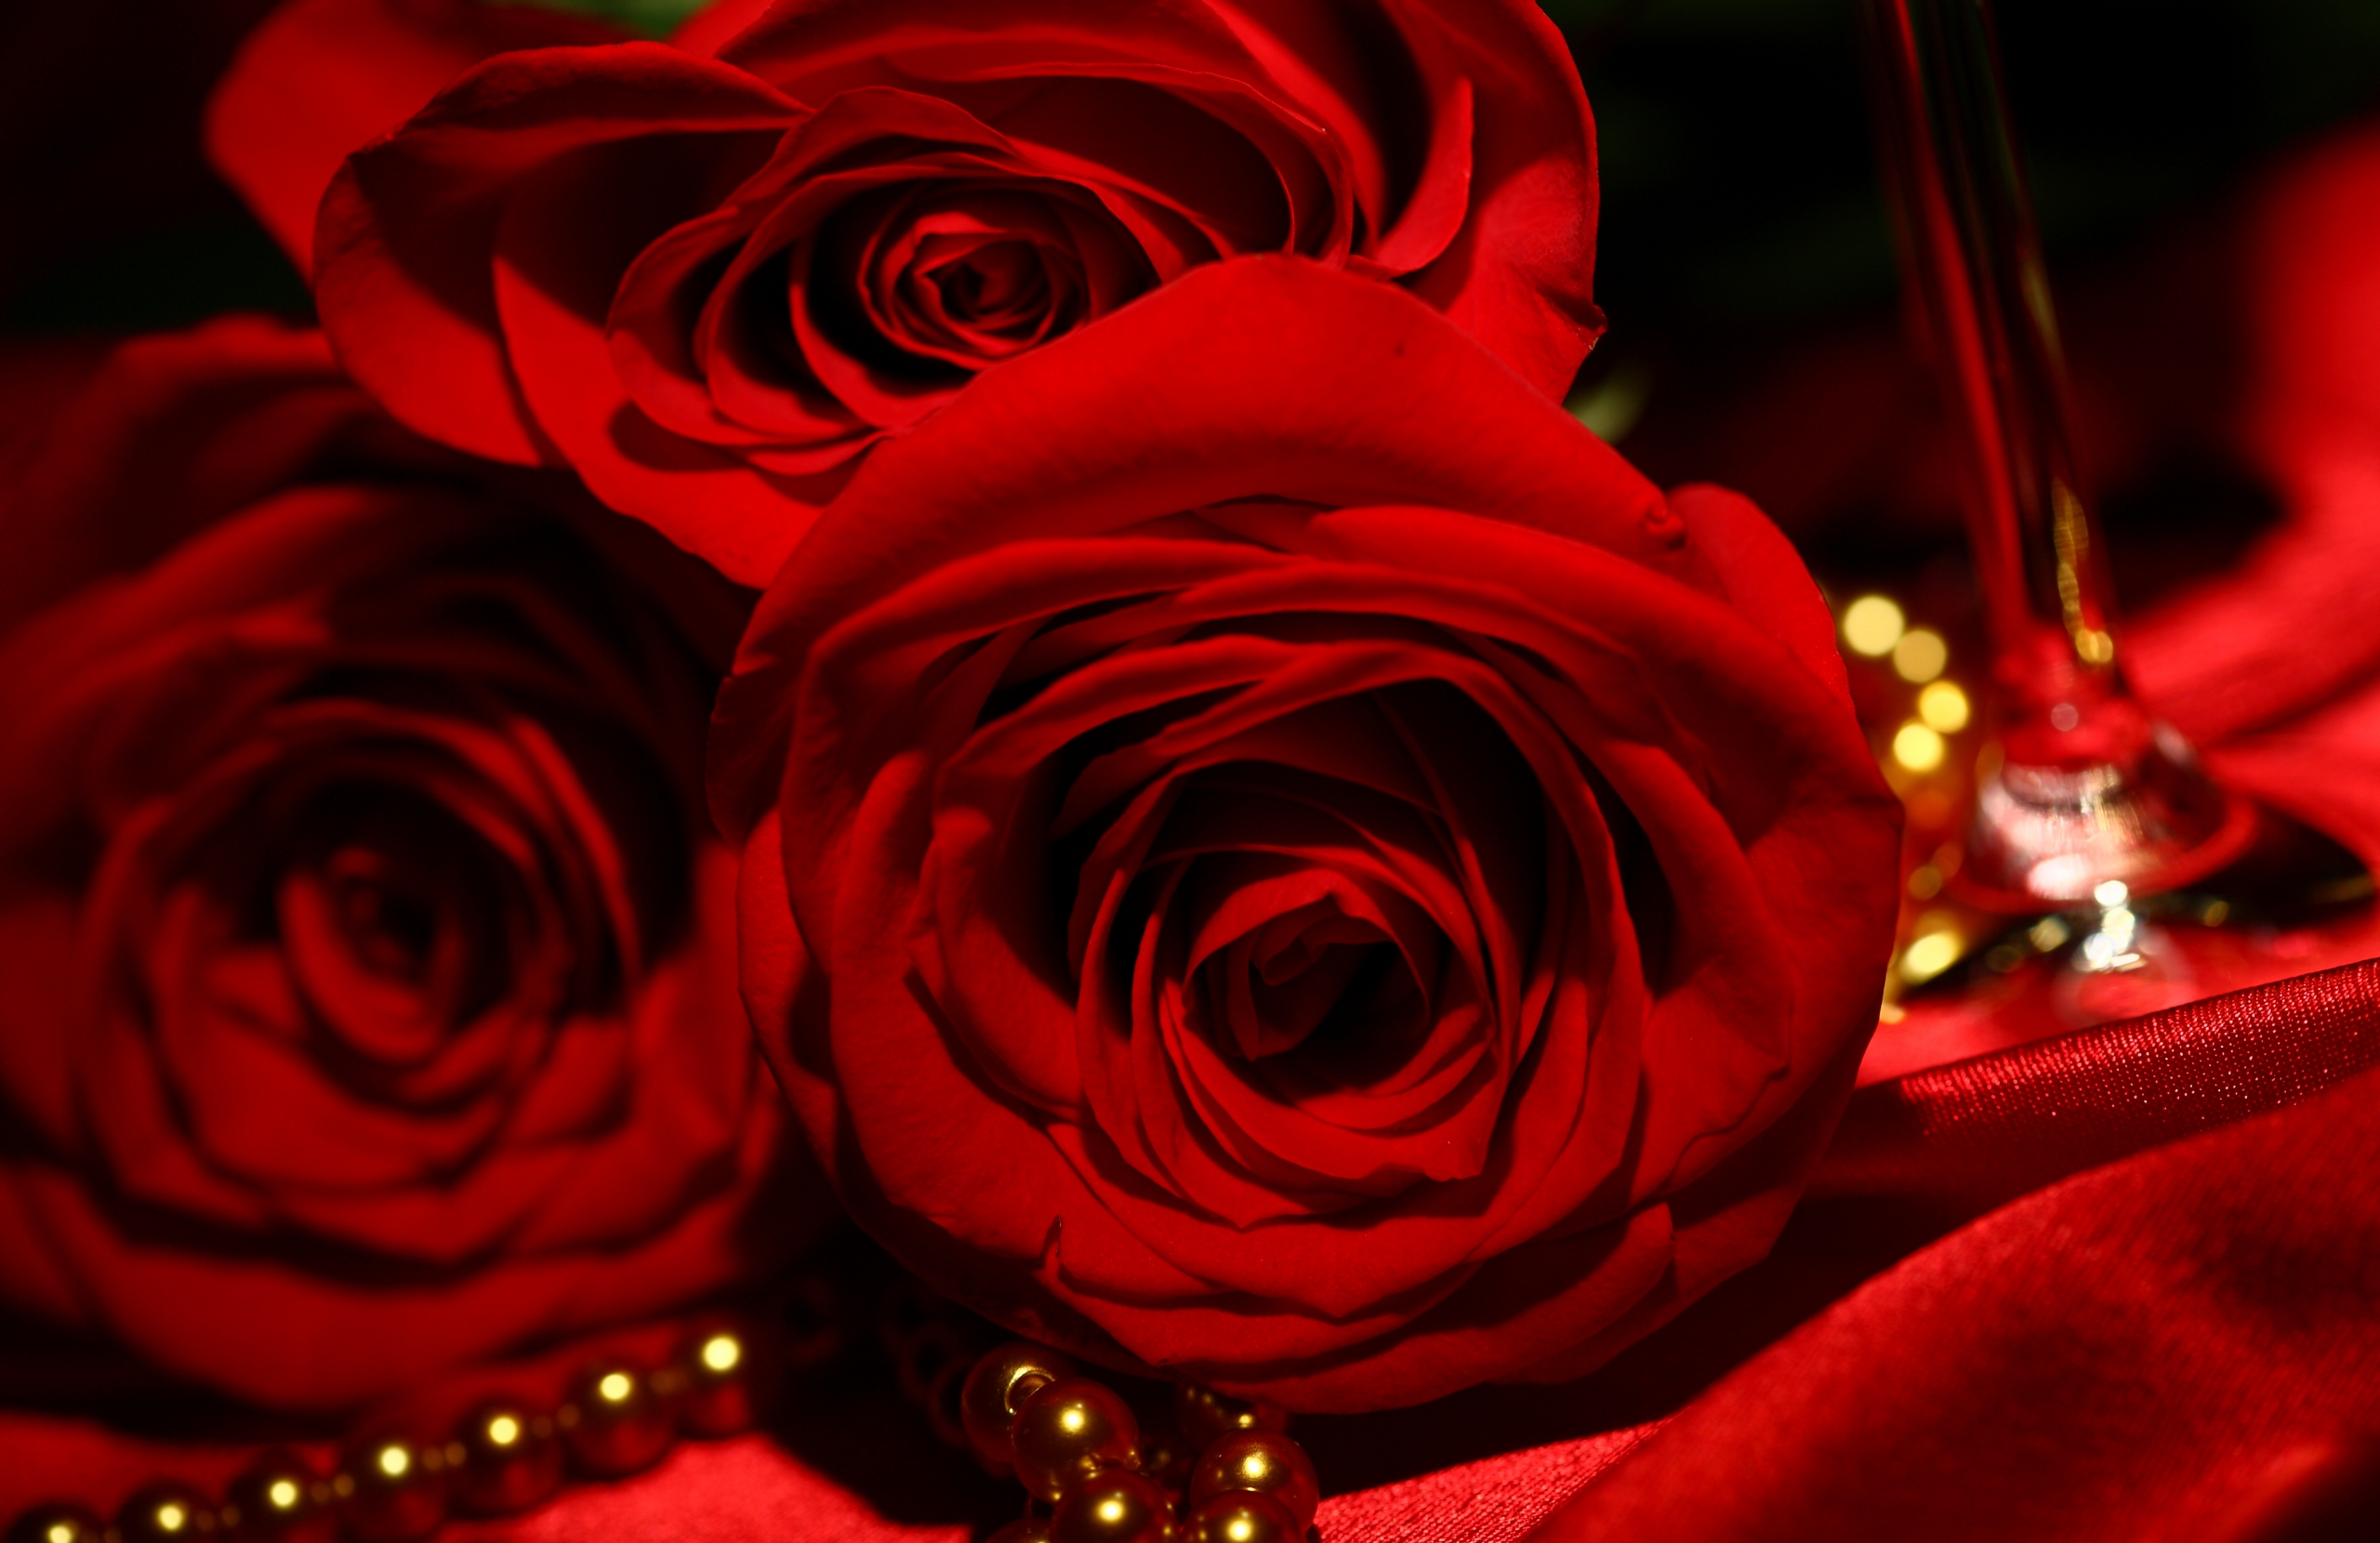 Red Rose Wallpaper Pictures To Pin